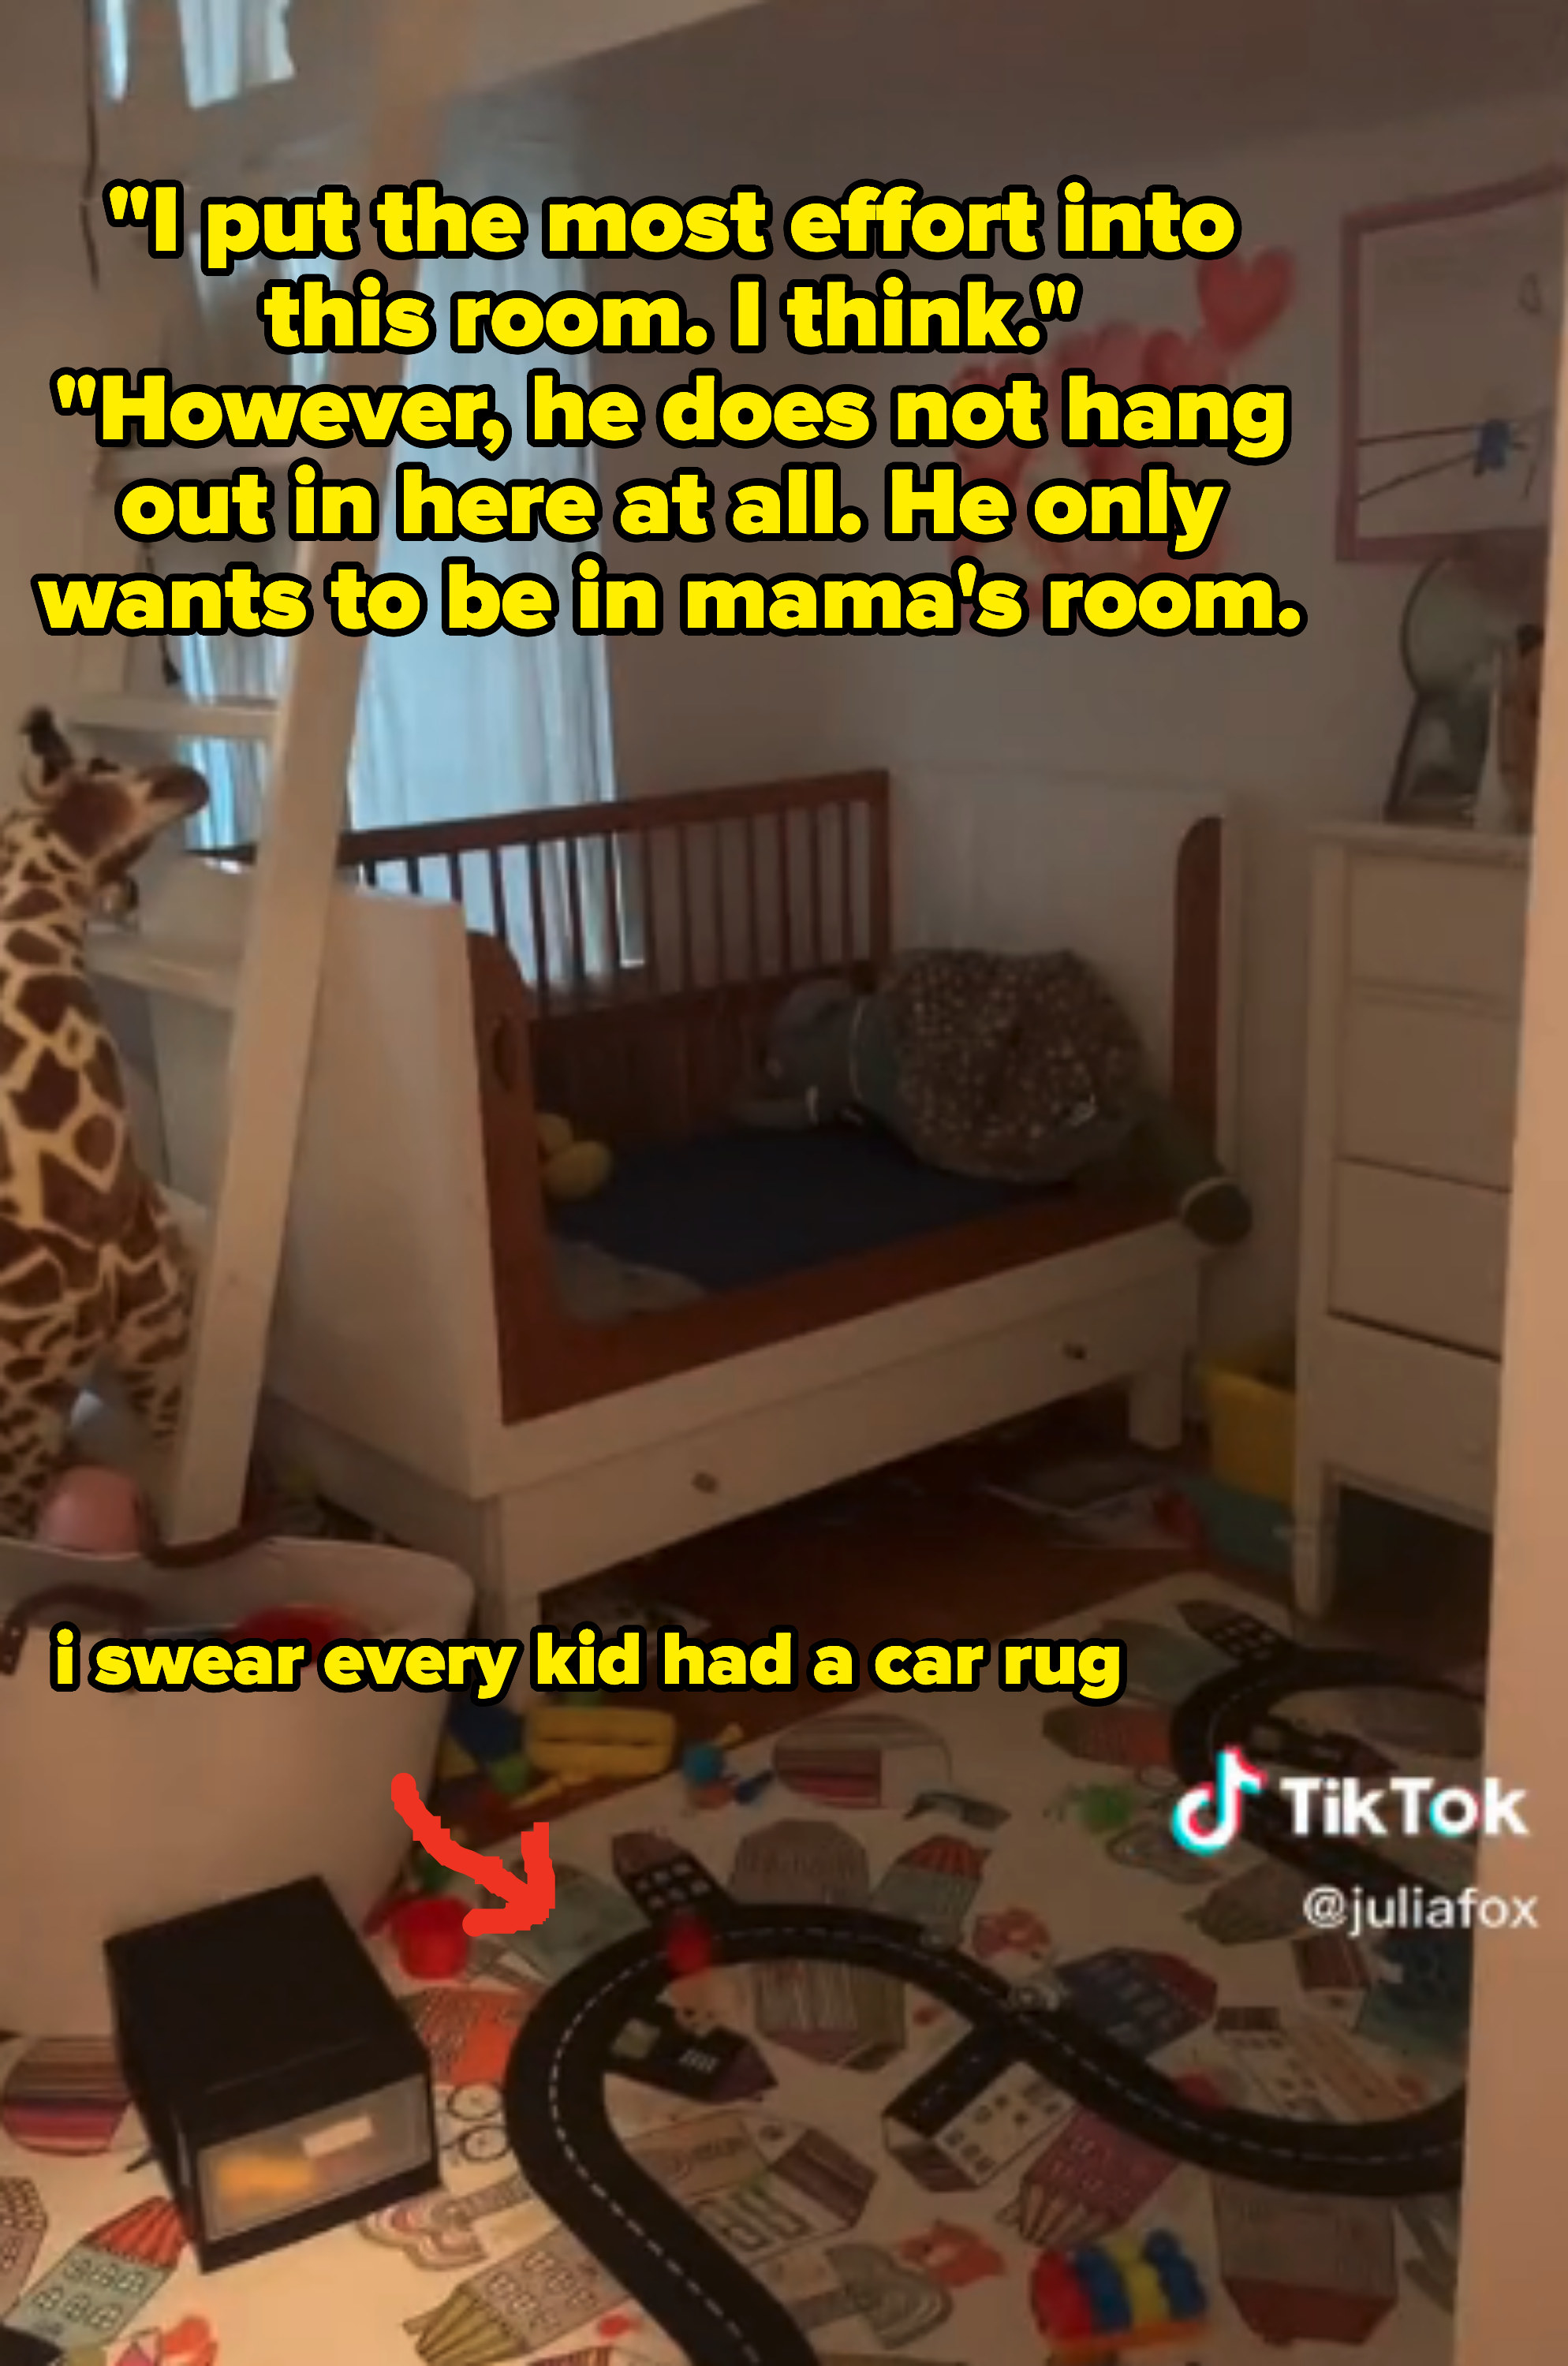 Valentino&#x27;s room has a bunk bed, a car rug, and a stuffed giraffe